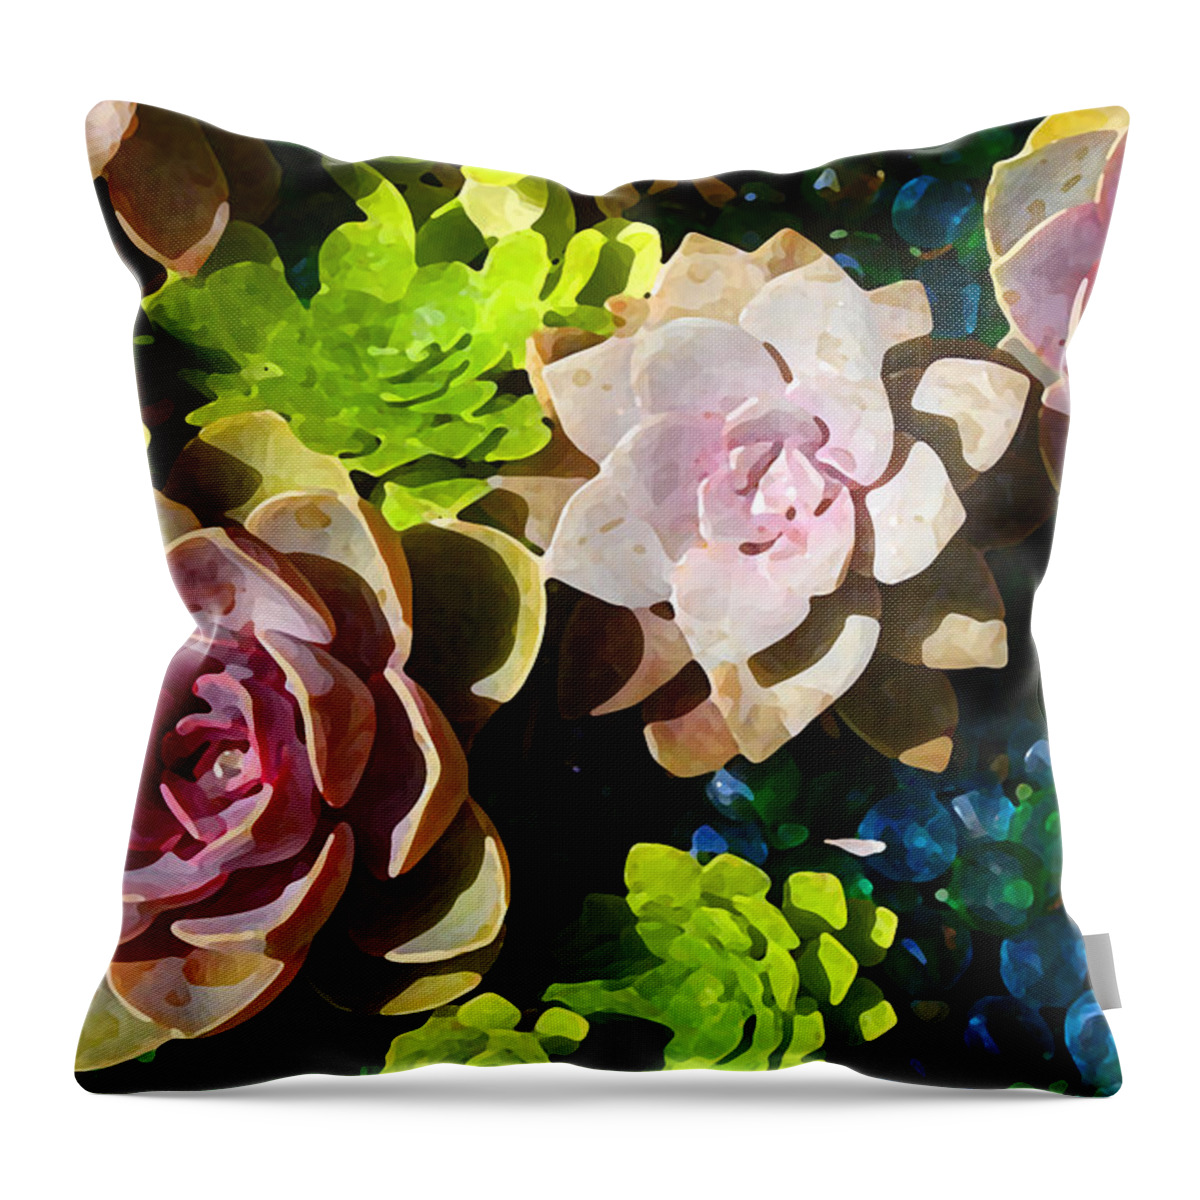  Throw Pillow featuring the painting Succulent Pond 4 by Amy Vangsgard